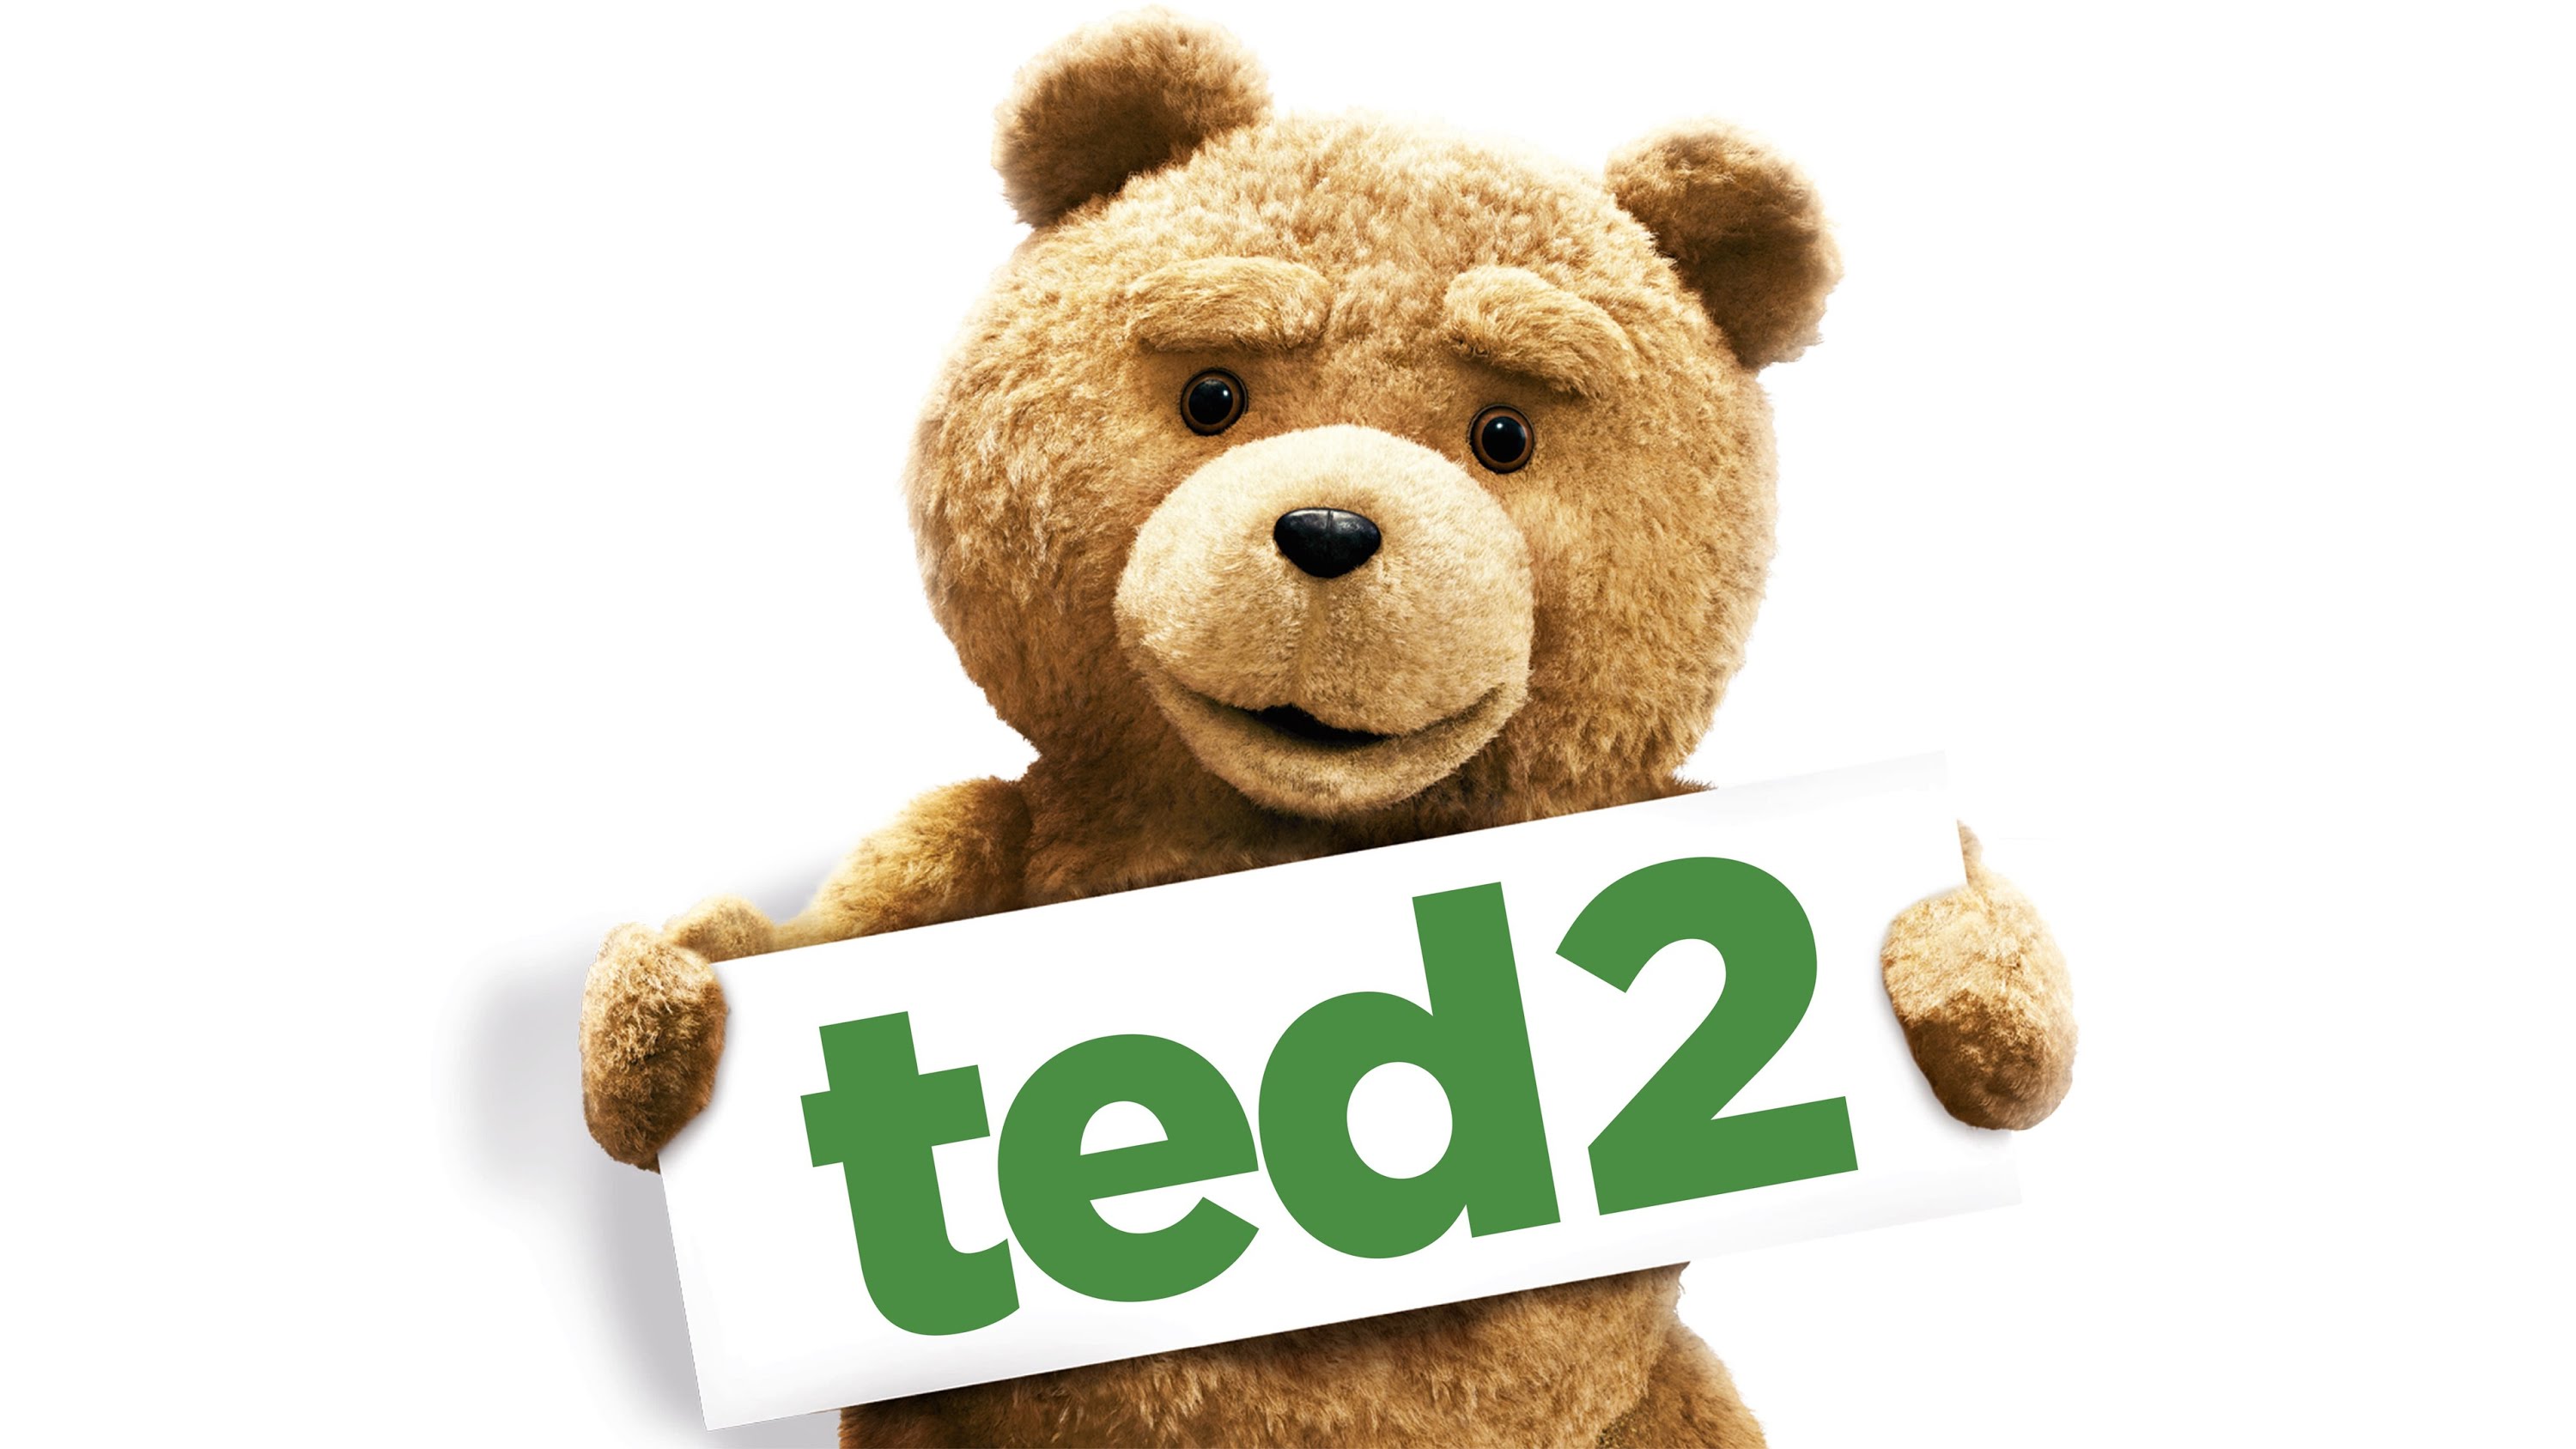 Ted 2 #17